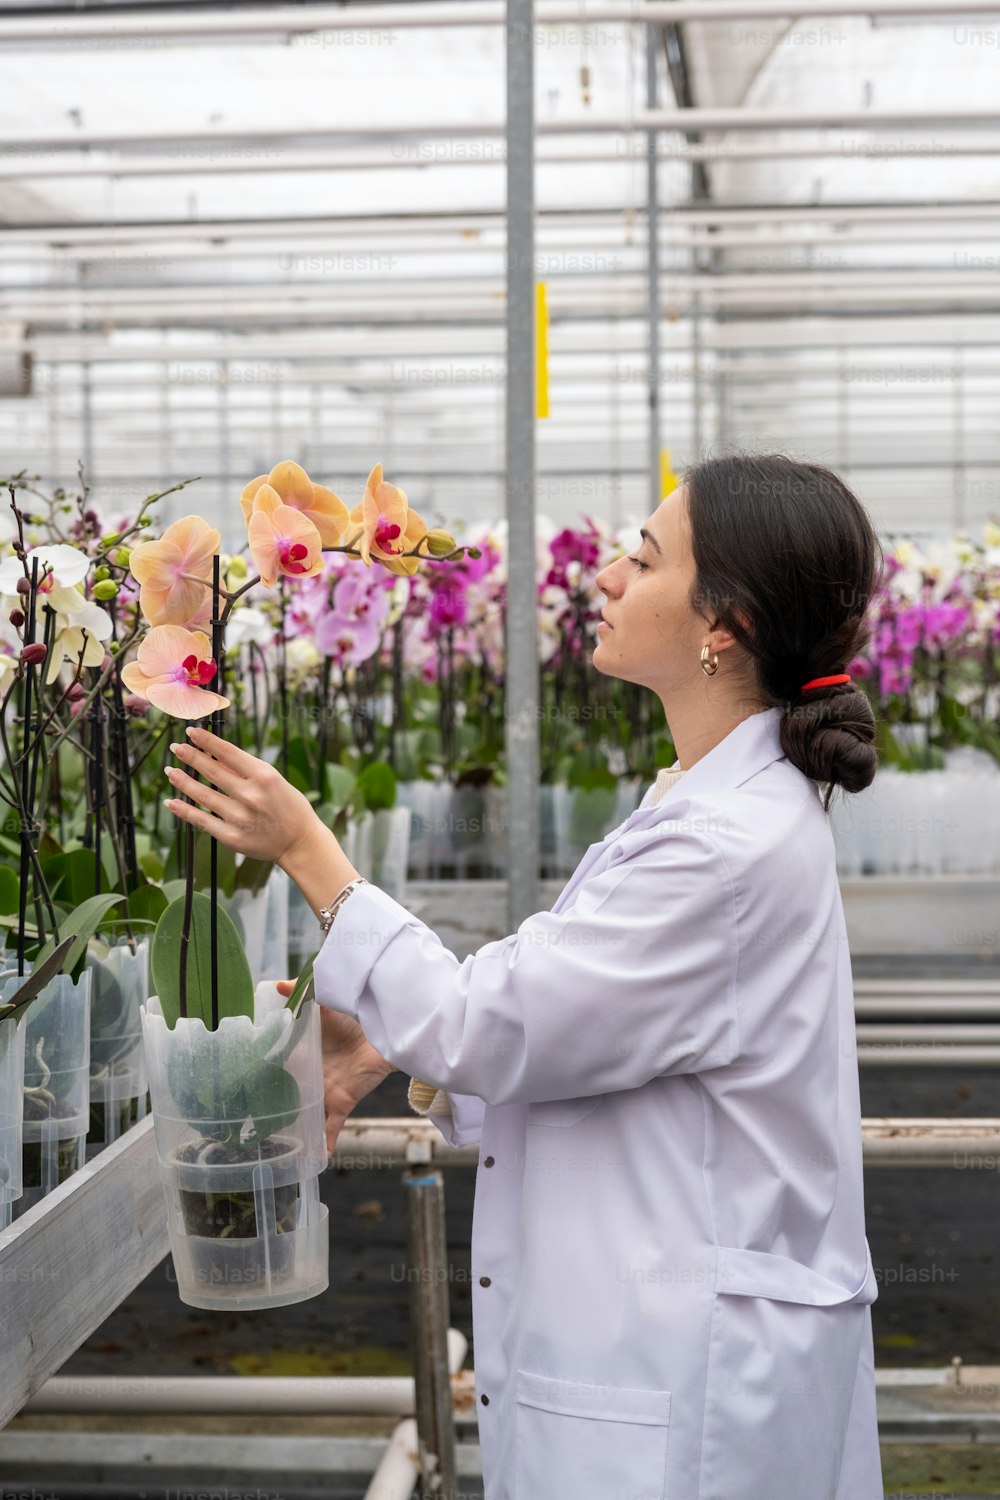 a woman in a white lab coat is looking at flowers in a greenhouse